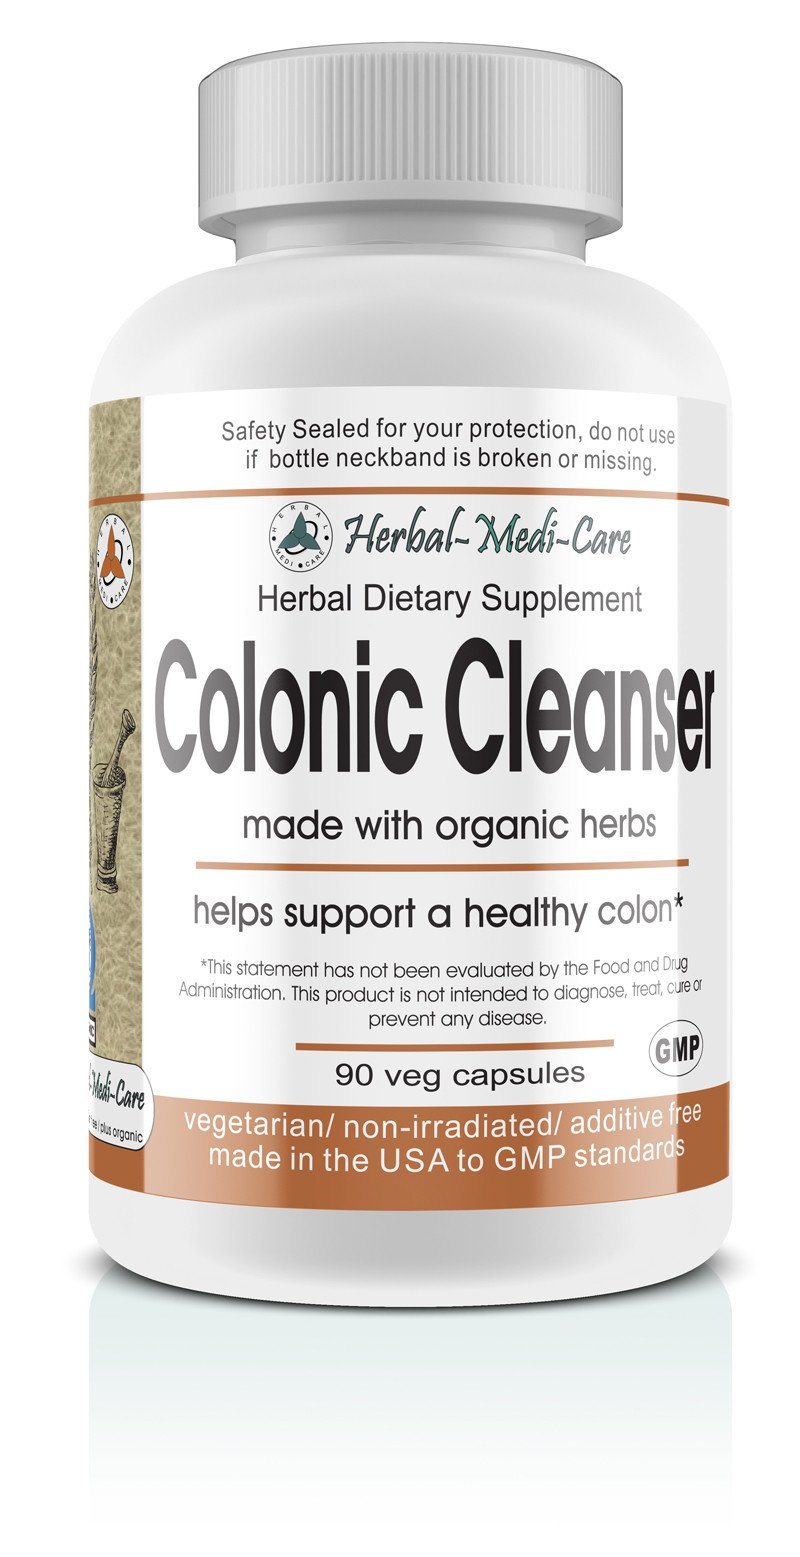 Herbal-Medi-Care Whole Food Colonic Cleanser Vegetarian Capsules; 90-Count, Made with Organic - Herbal-Medi-Care Whole Food Colonic Cleanser Vegetarian Capsules; 90-Count, Made with Organic - Herbal-Medi-Care Whole Food Colonic Cleanser Vegetarian Capsules; 90-Count, Made with Organic